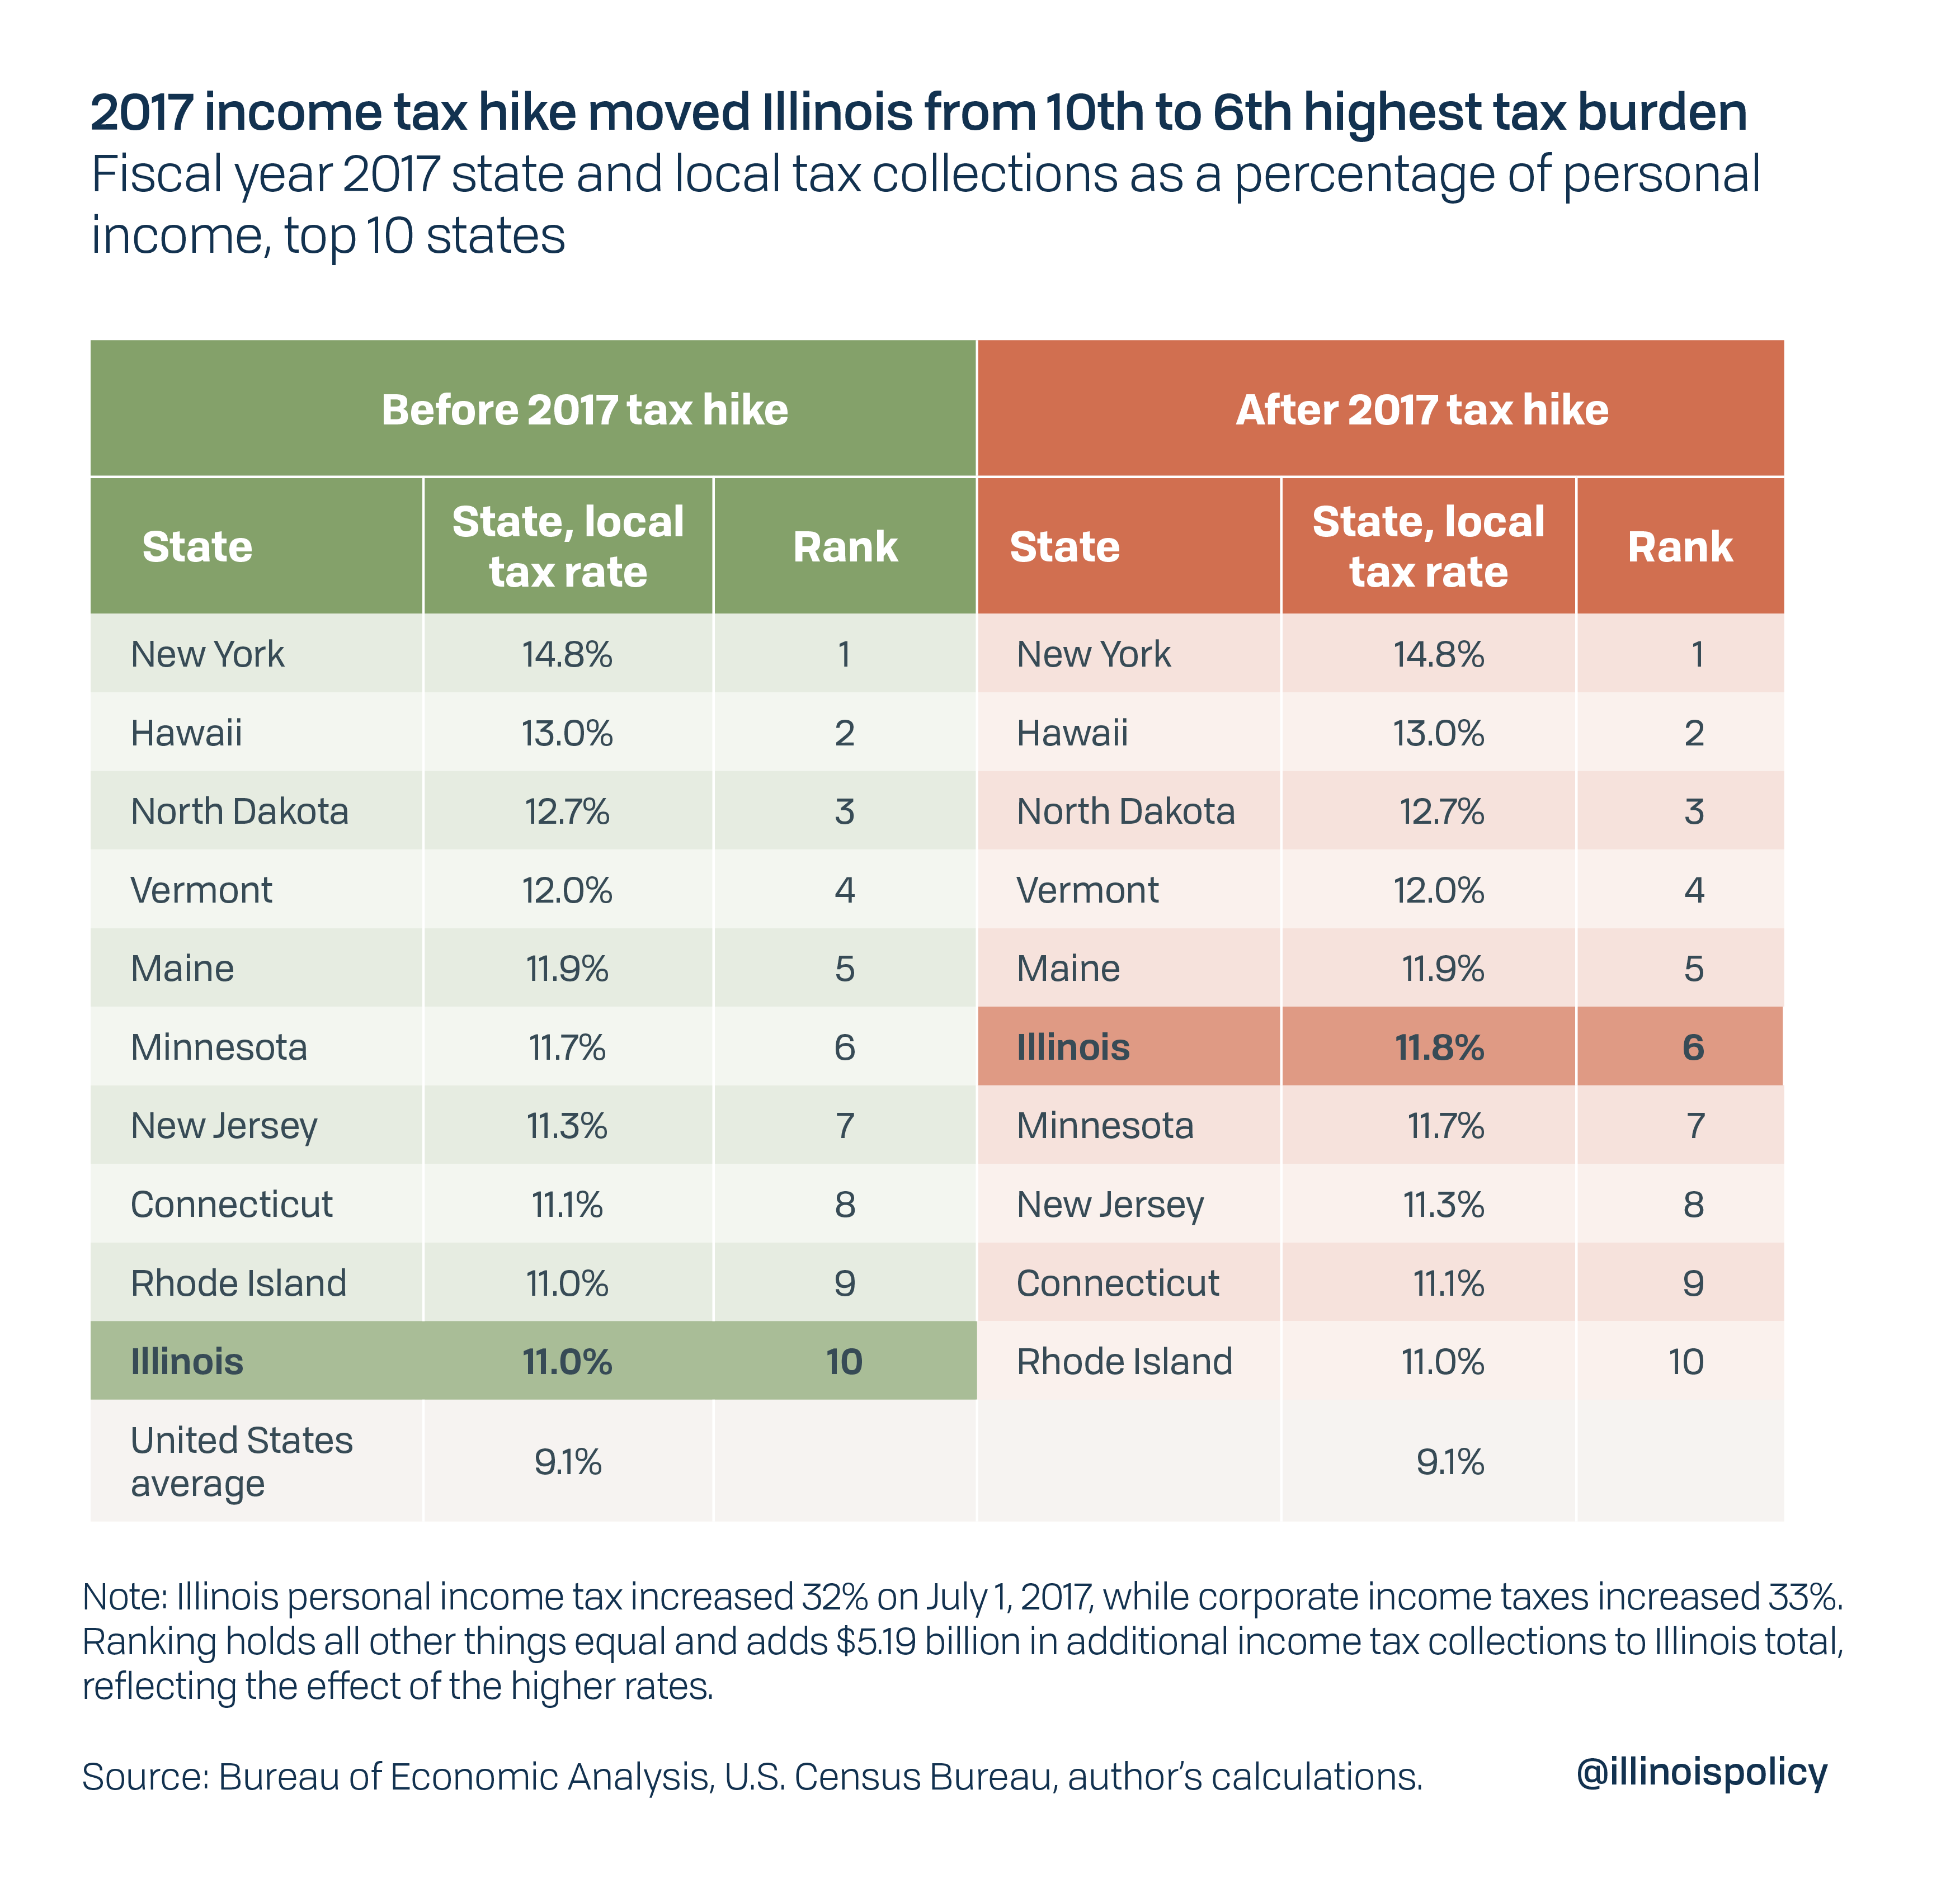 2017 income tax moved Illinois from 10th to 6th highest tax burden